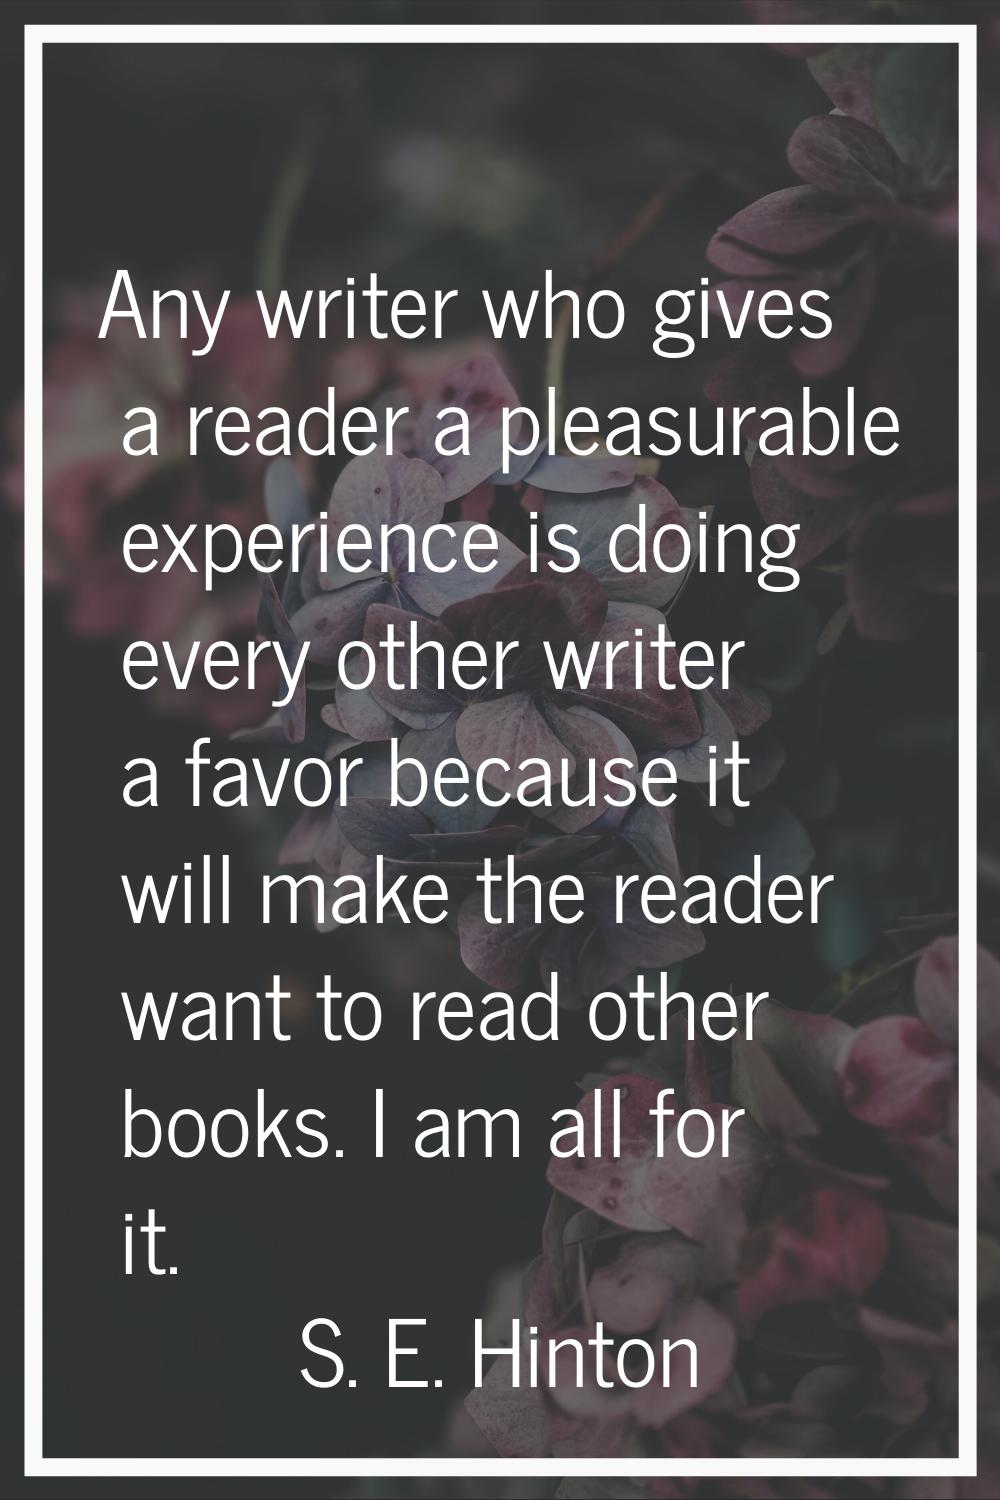 Any writer who gives a reader a pleasurable experience is doing every other writer a favor because 